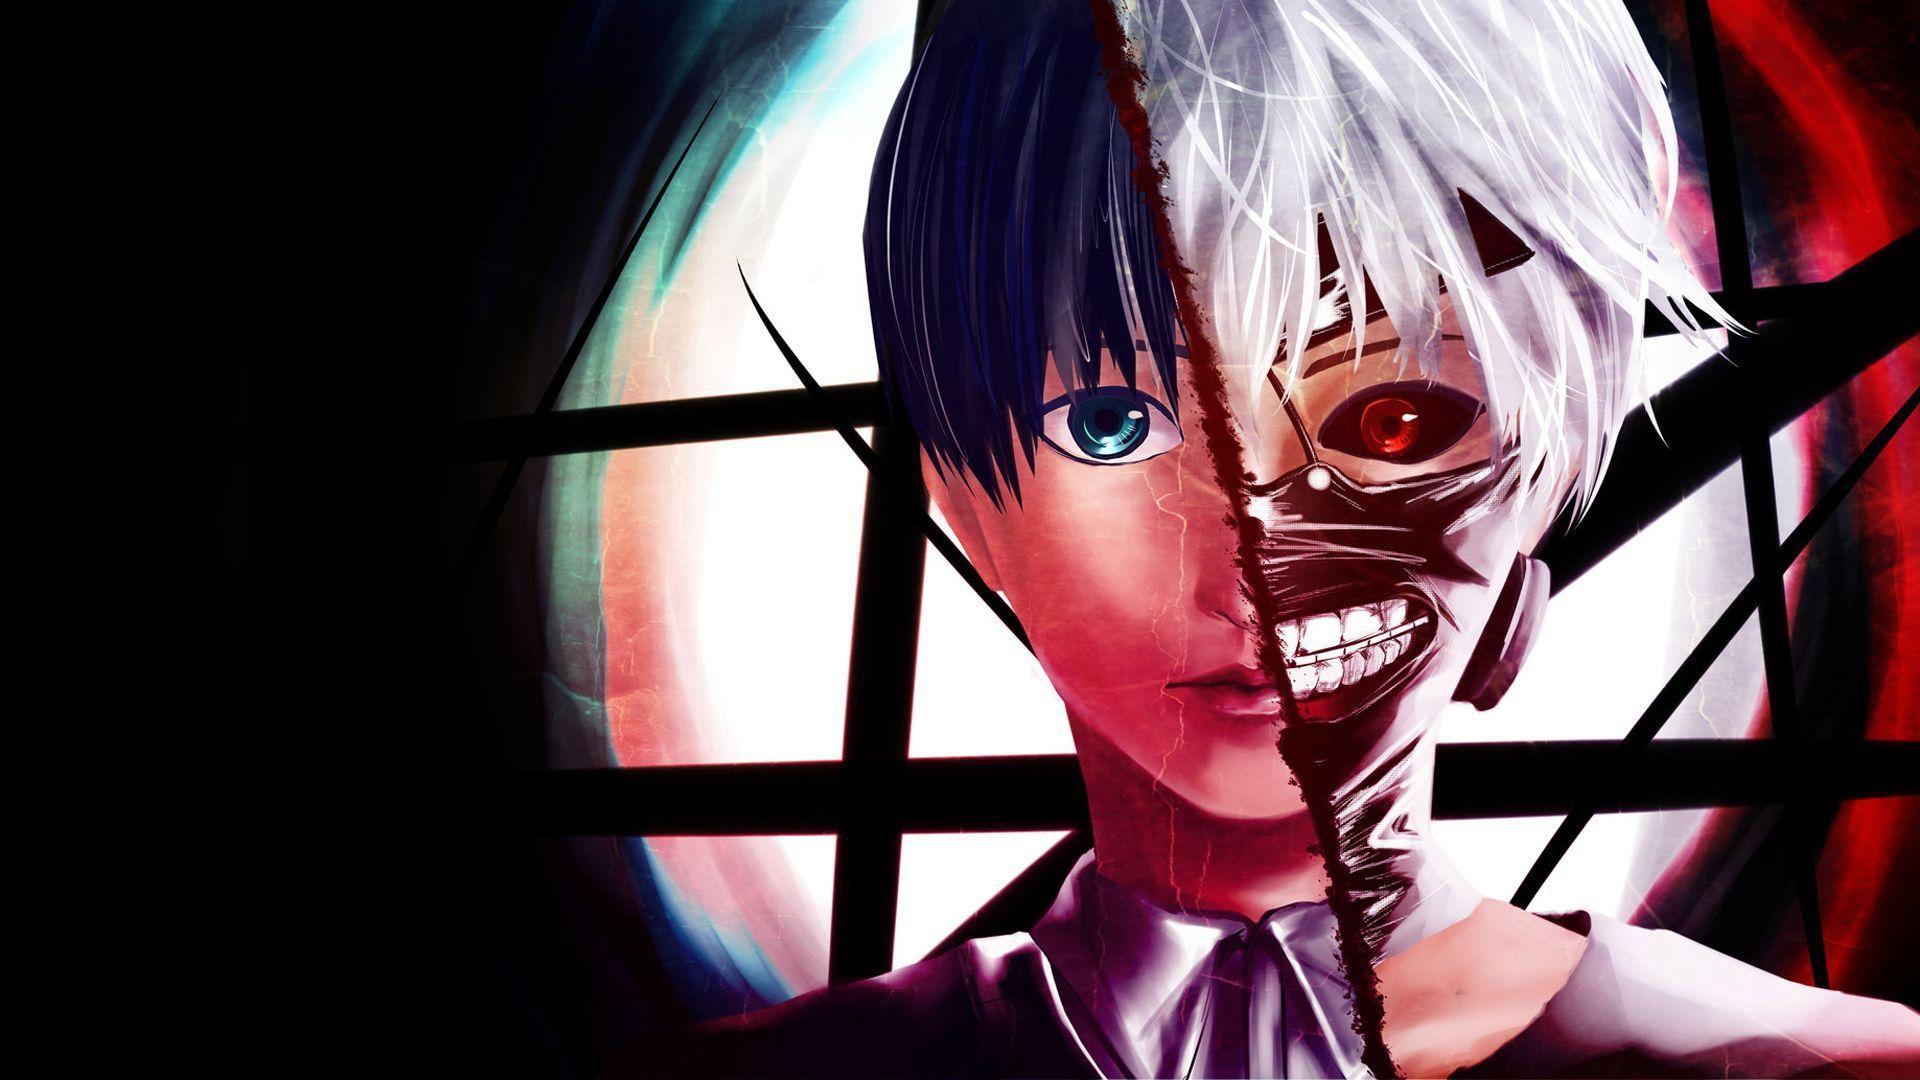 Wallpaper Anime Tokyo Ghoul HD Android. Best Funny Image